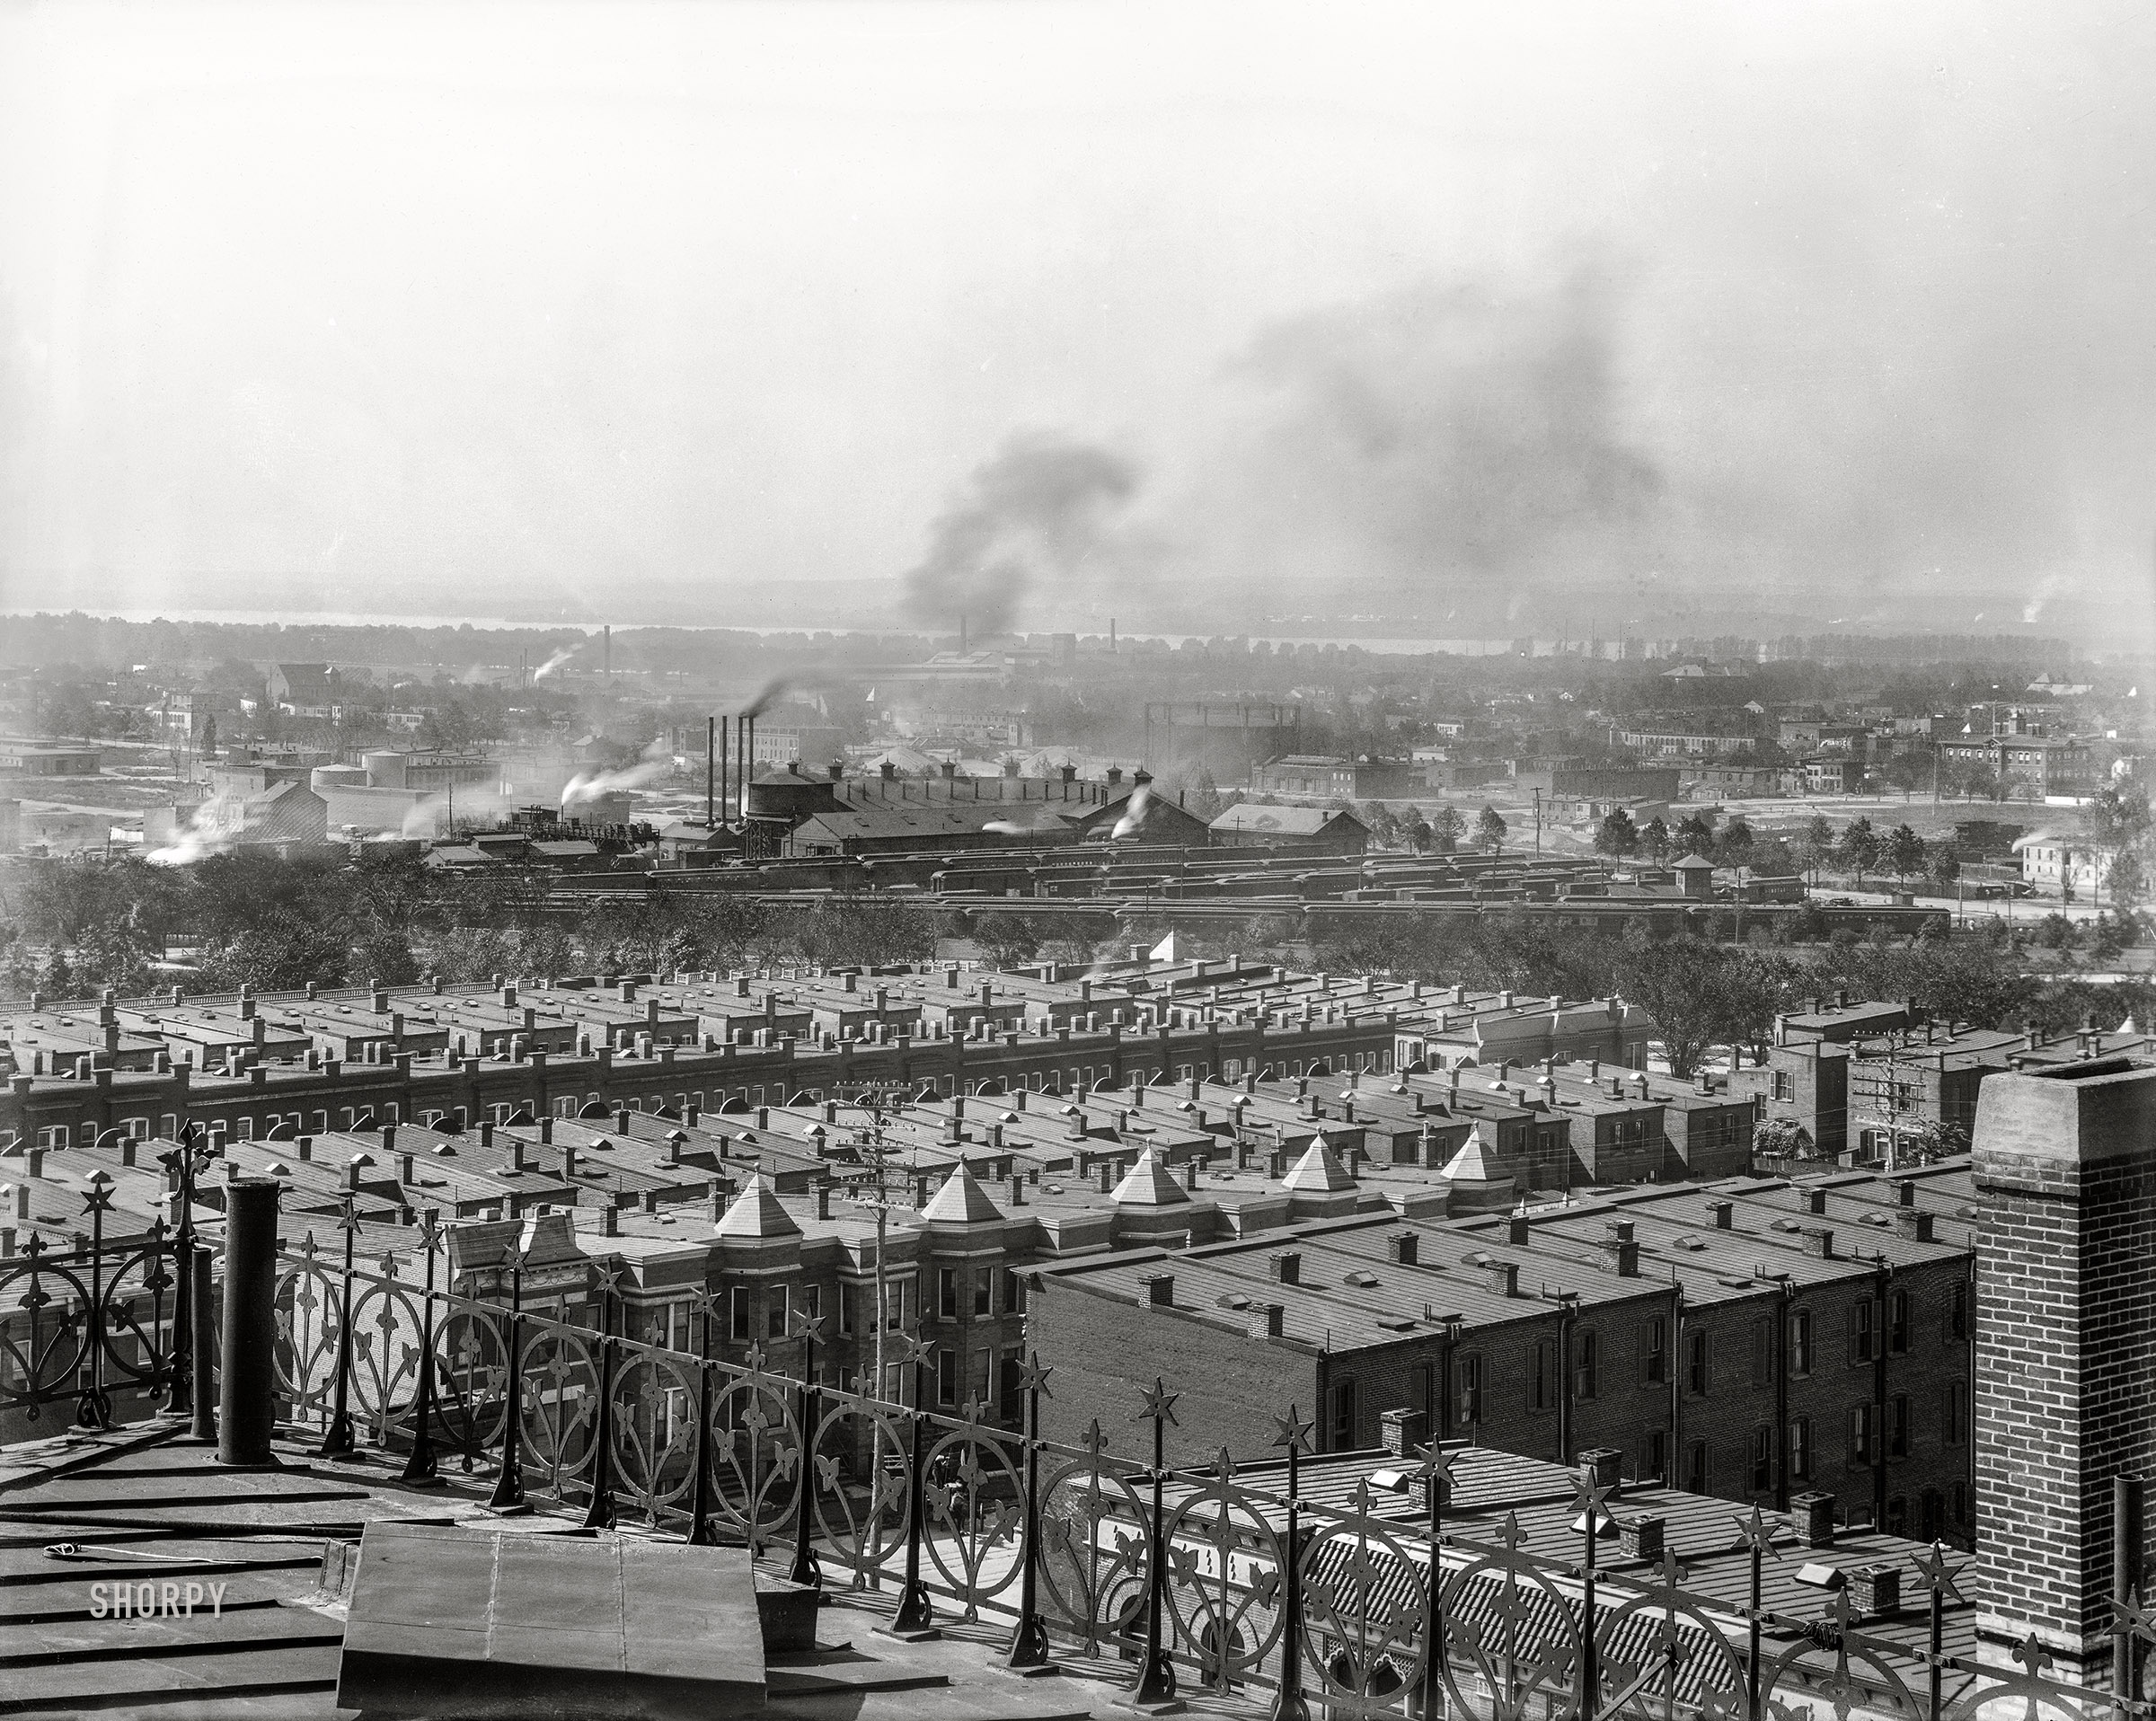 &nbsp; &nbsp; &nbsp; &nbsp; This image is but one section of 10-part panorama, described by the caption below. Some (or even all) of the points of interest mentioned may not be visible here.
Washington, D.C., circa 1901. "Aerial view over rowhouses from old Providence Hospital, showing E Street, Heckman Street [now Duddington Place] and F Street S.E. between 1st and 2nd." 8x10 inch glass negative, D.C. Street Survey Collection. View full size.